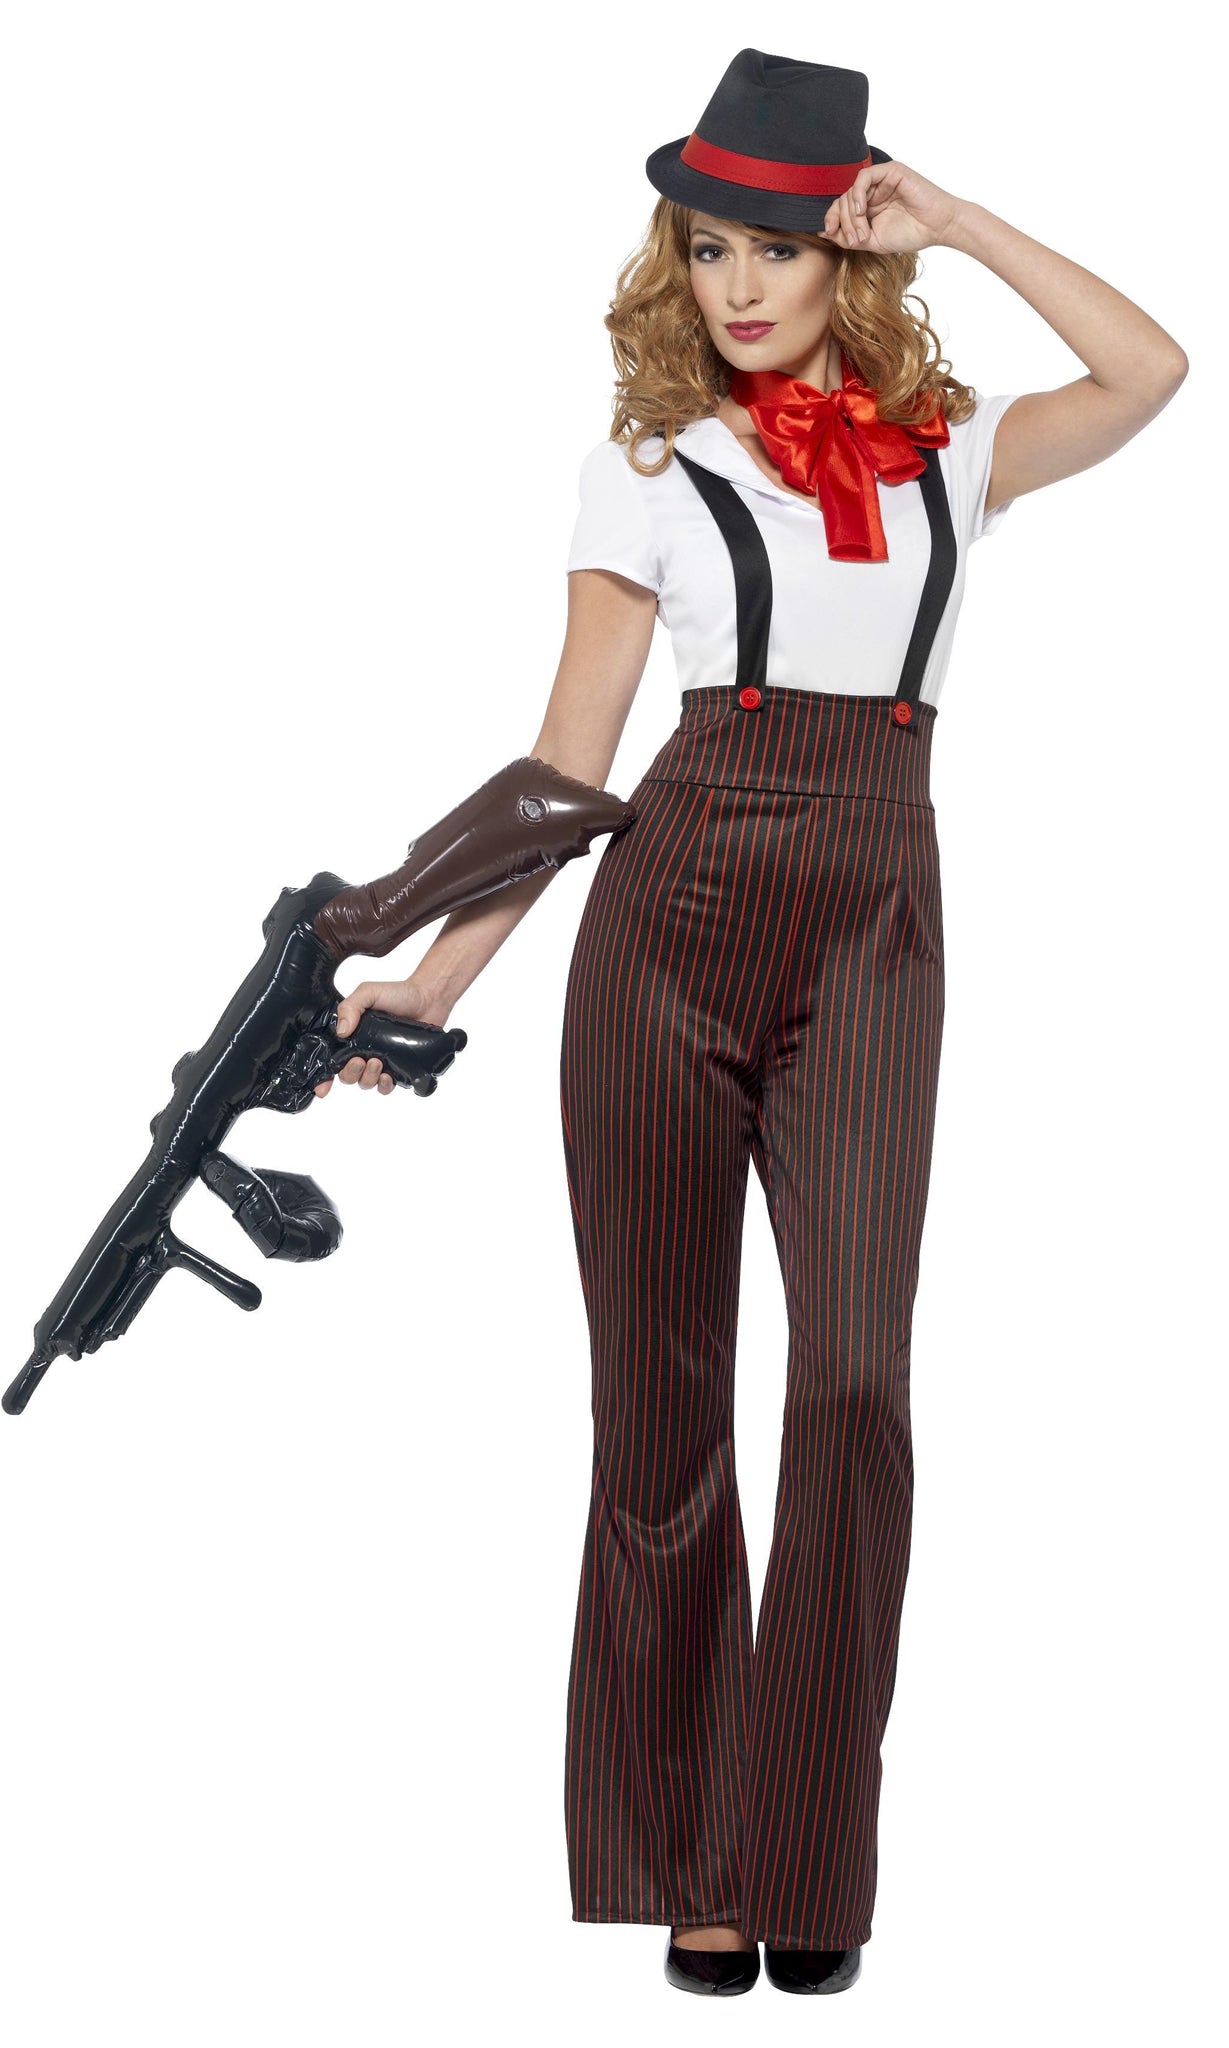 Pin stripe woman's gangster costume with mock braces and hat with red band